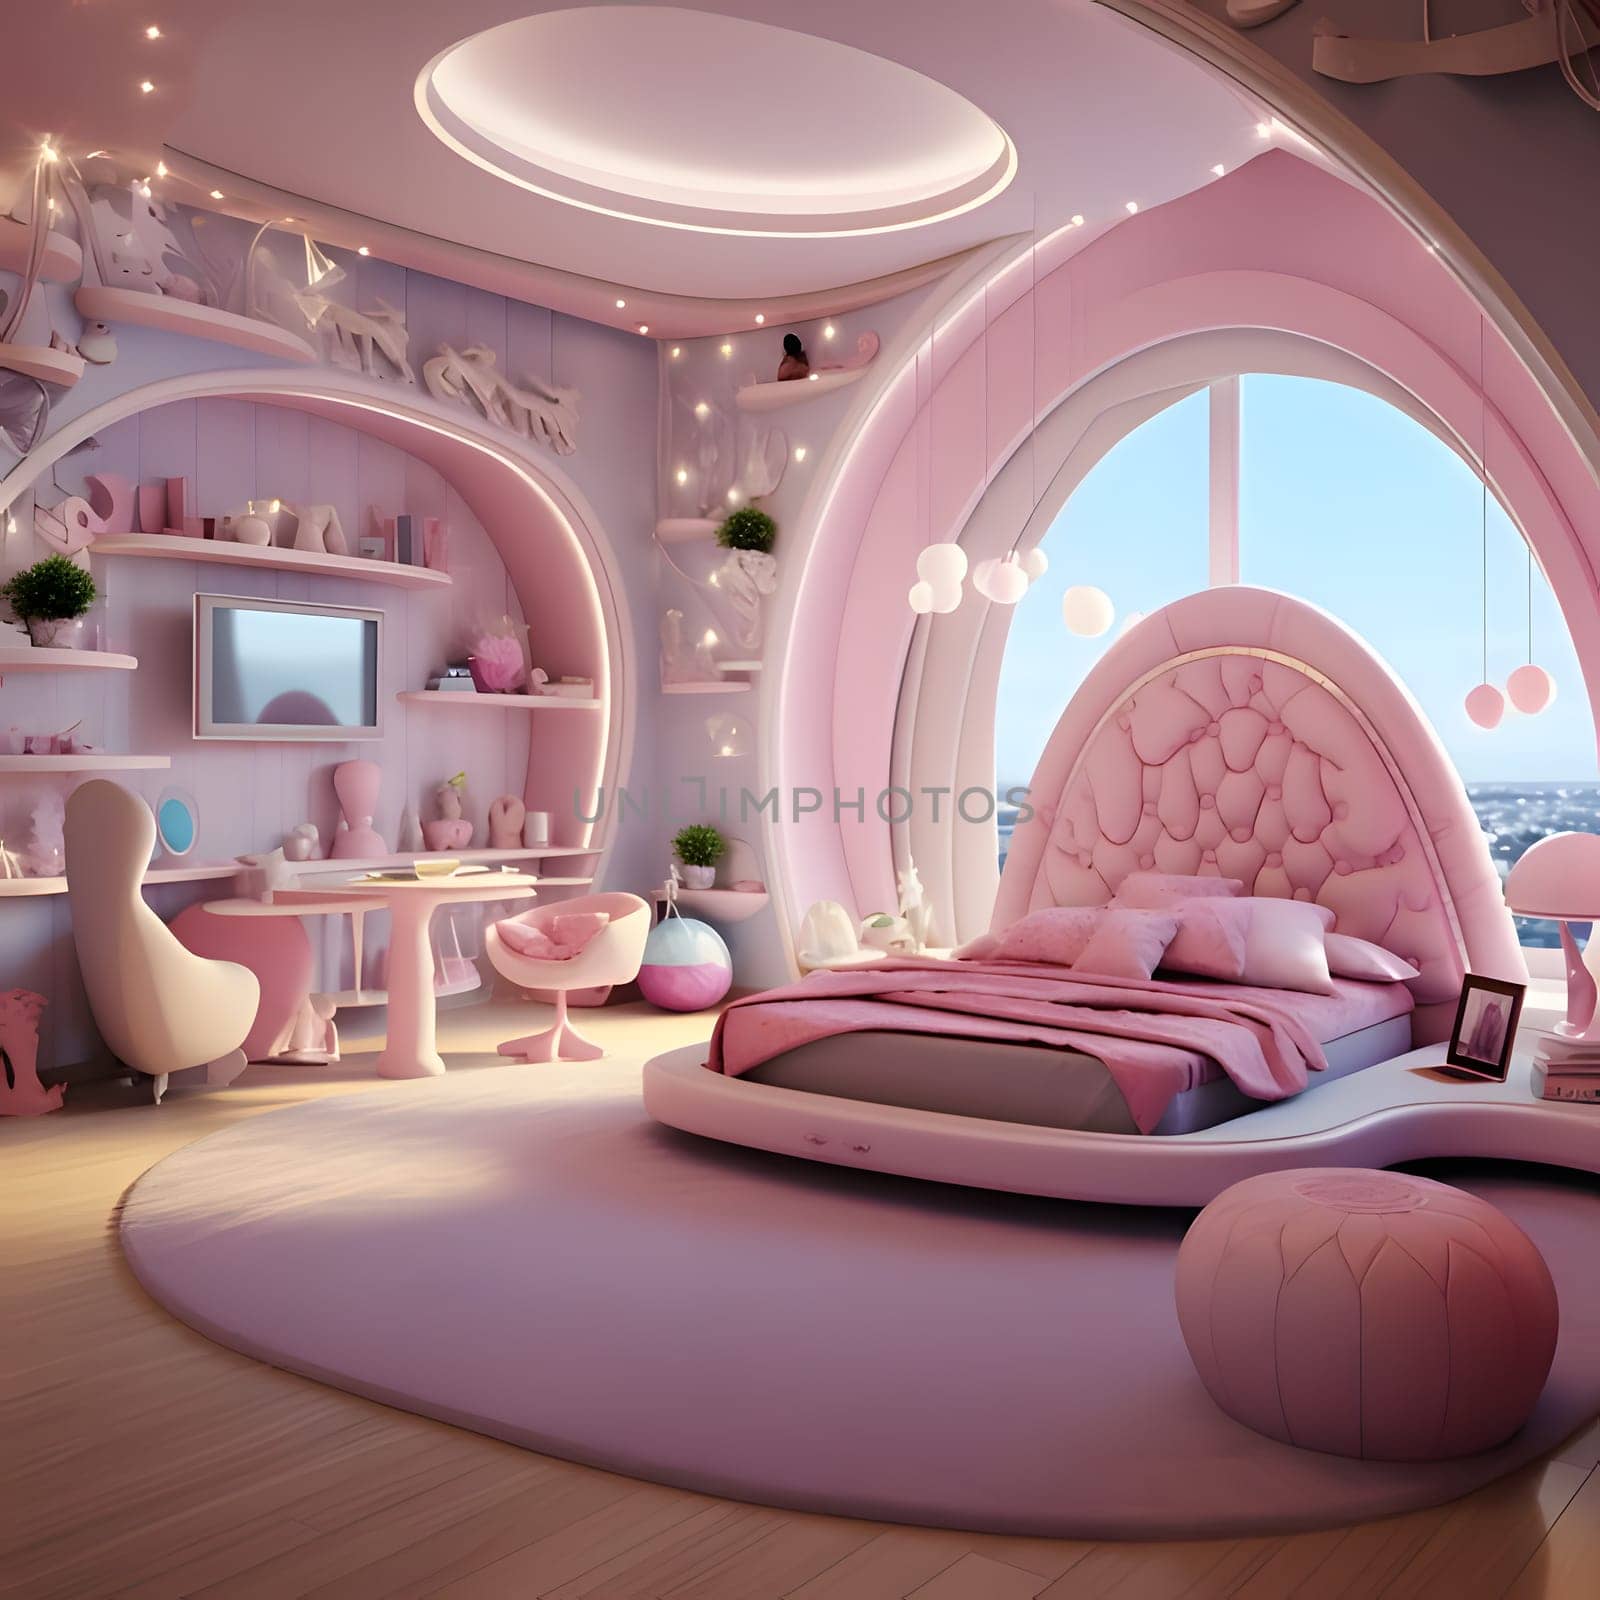 The pink Barbie room features a cozy bed with a soft carpet, a window providing natural light, and elegant furniture and shelves, creating a dreamy and stylish space.